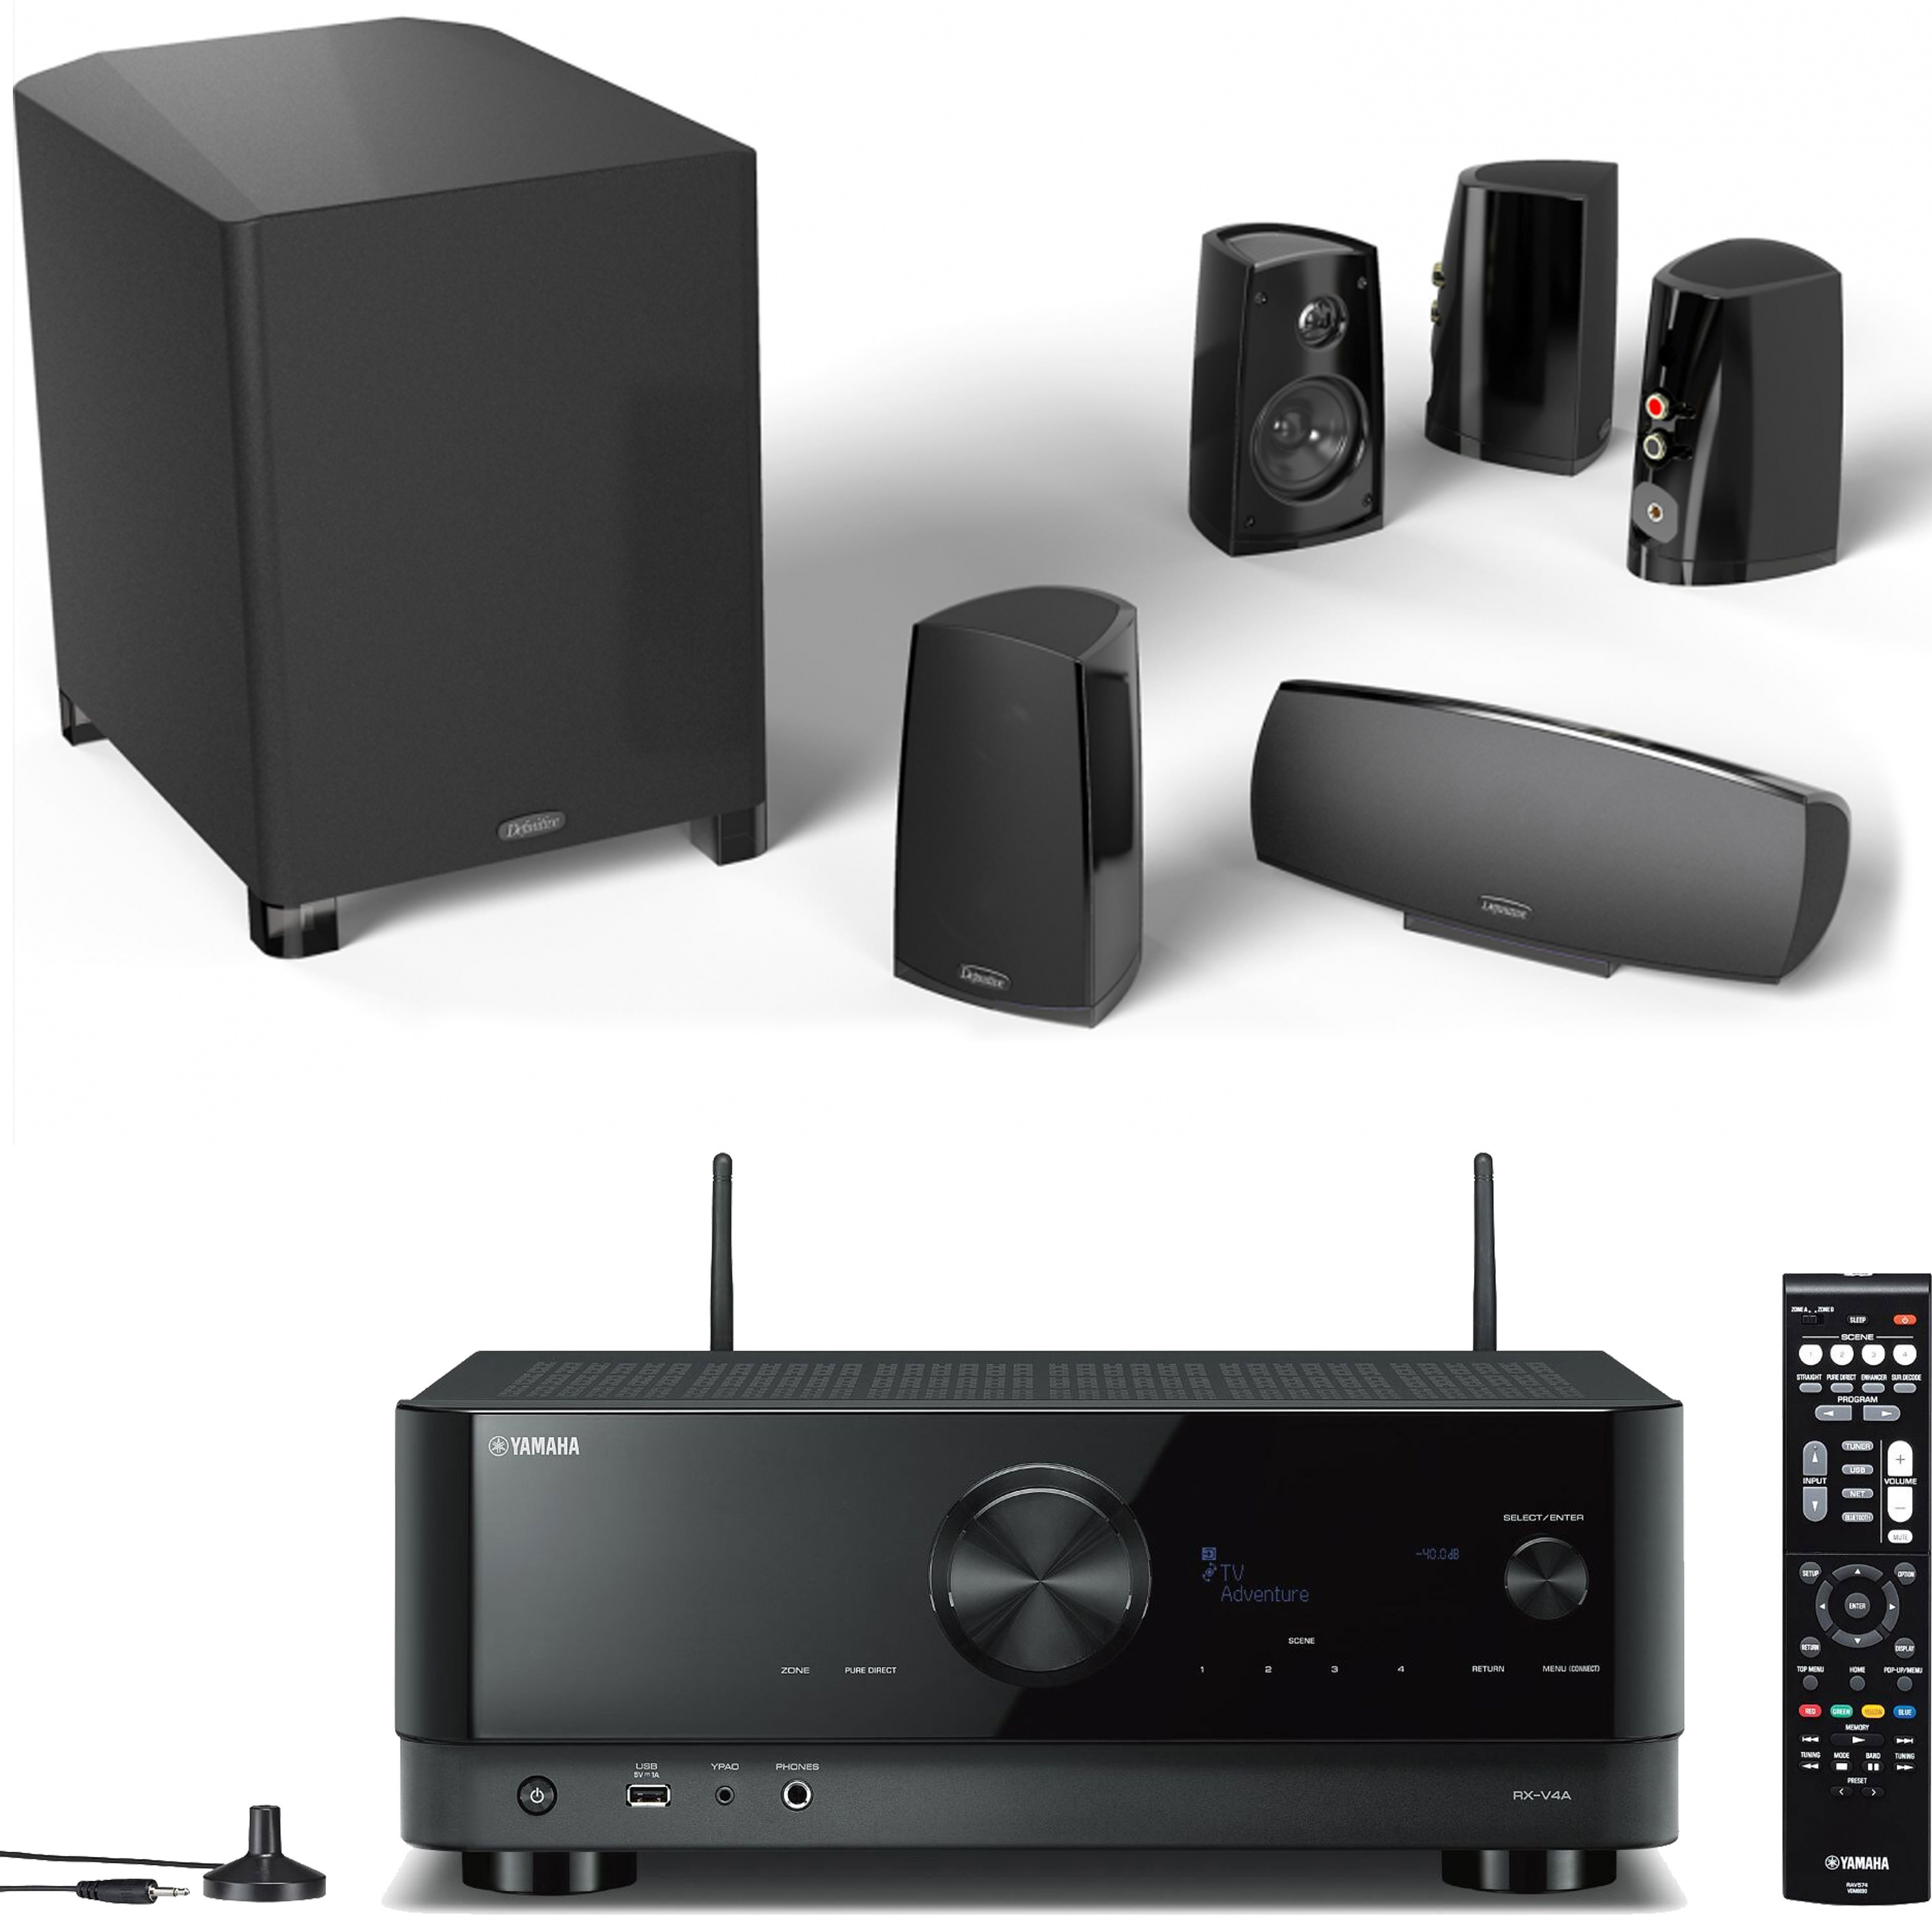 YAMAHA RX-V4A & DEF Tech ProCinema 400 Home Theater Package